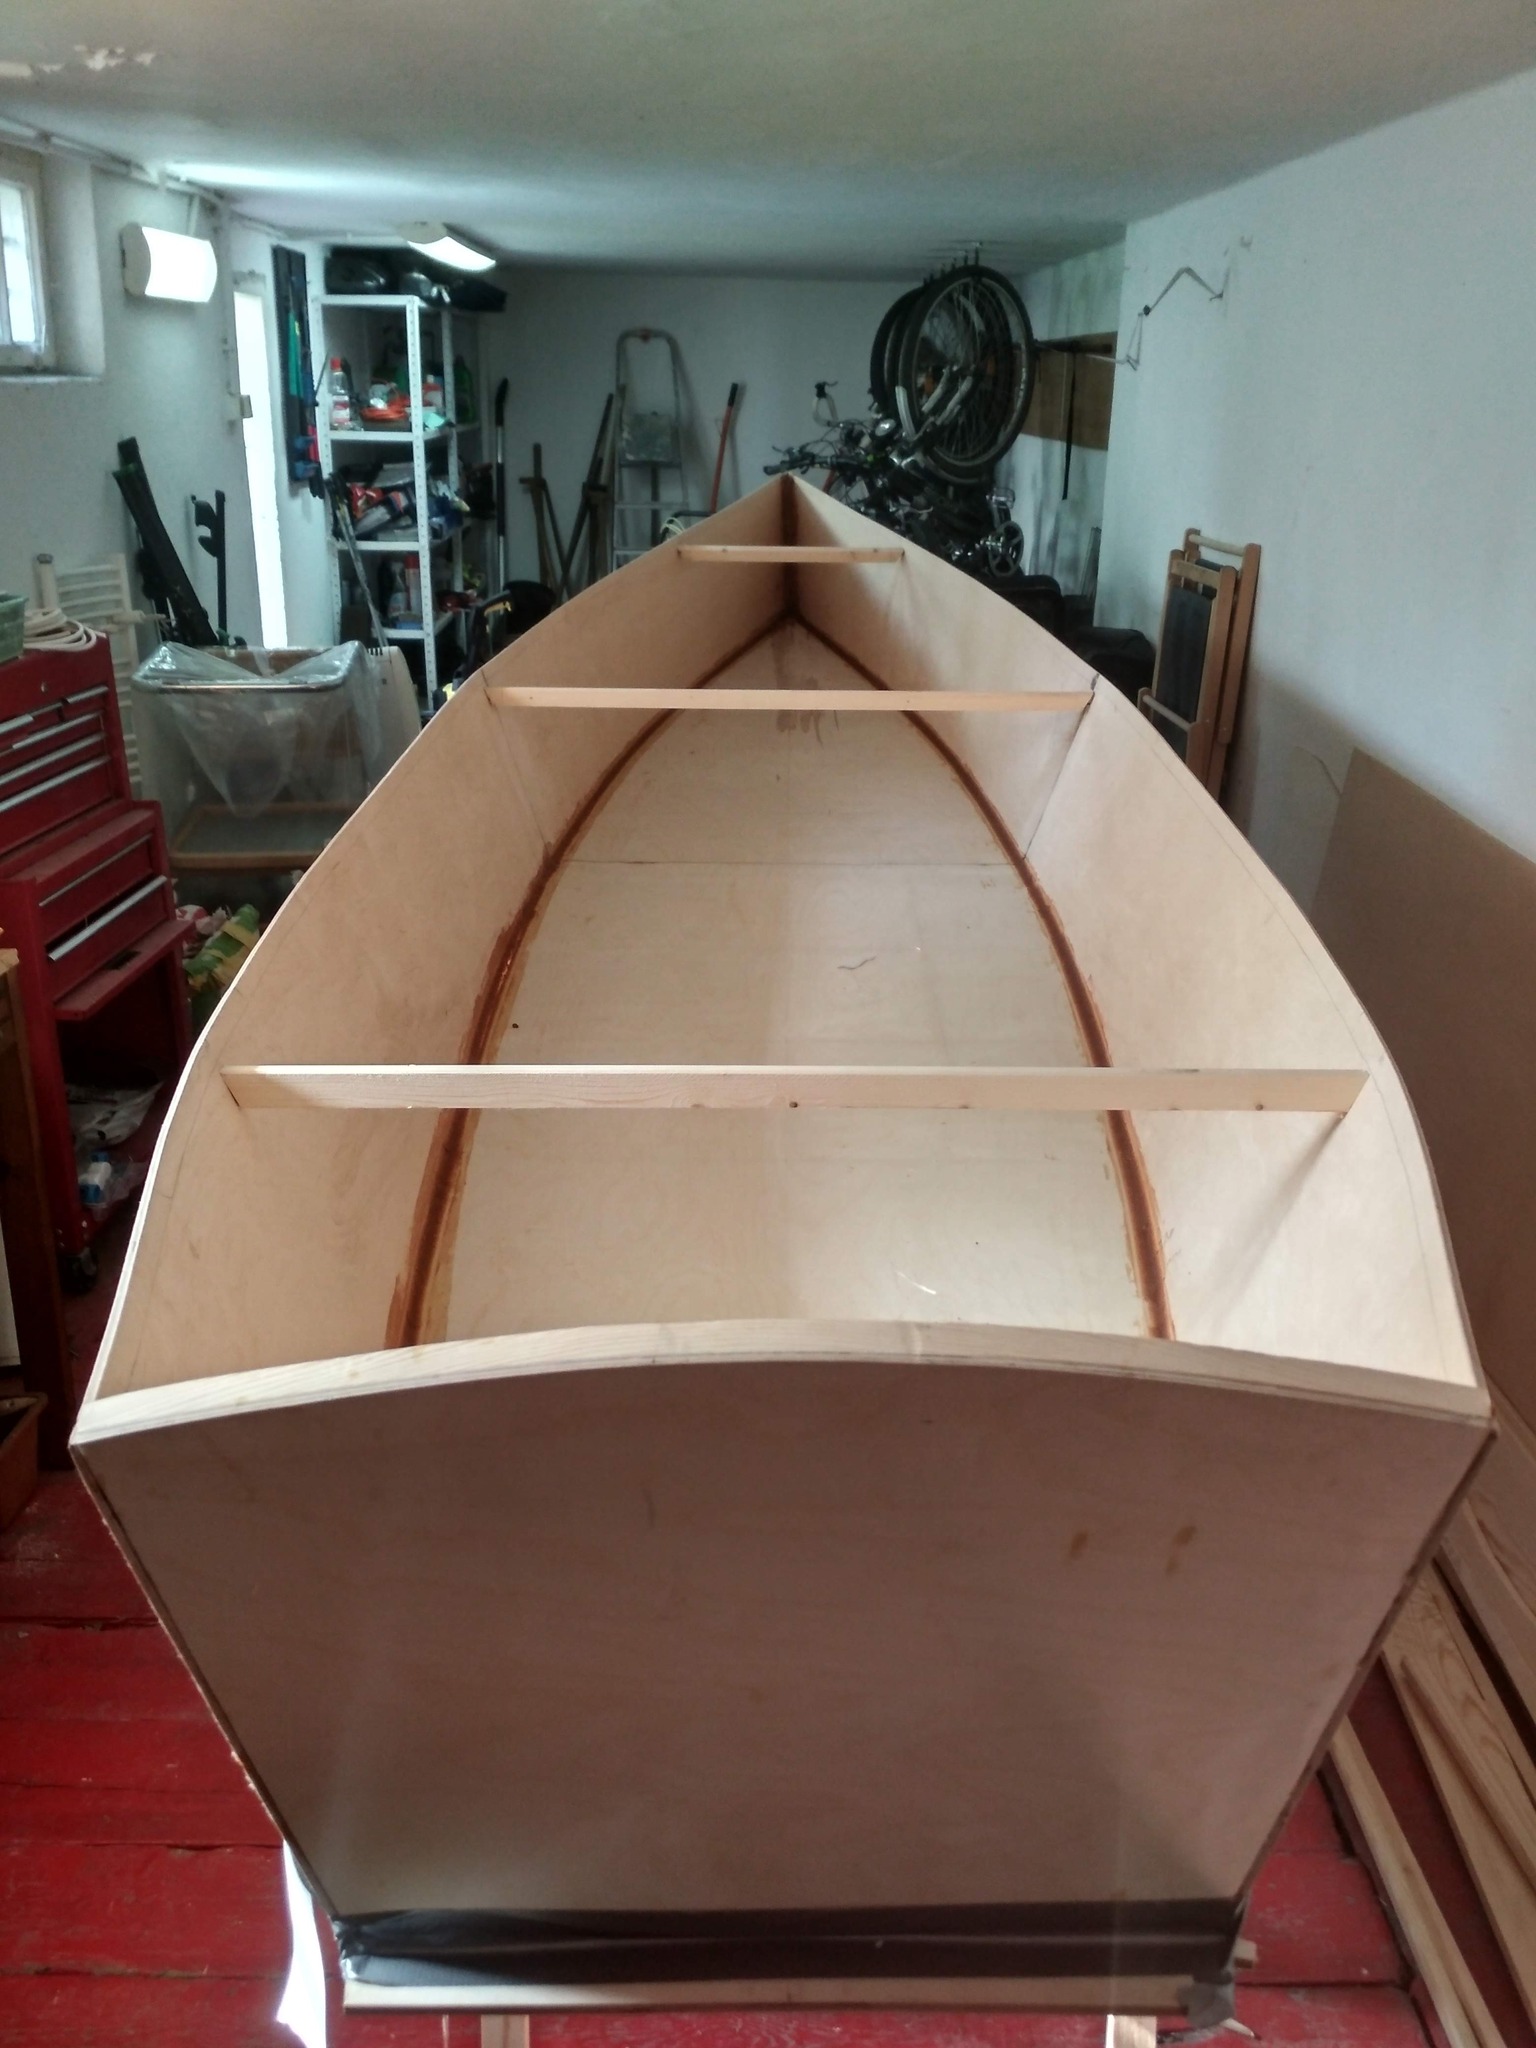 Plywood Boat Plans - Build a beautiful fast light boat - Storer Boat Plans